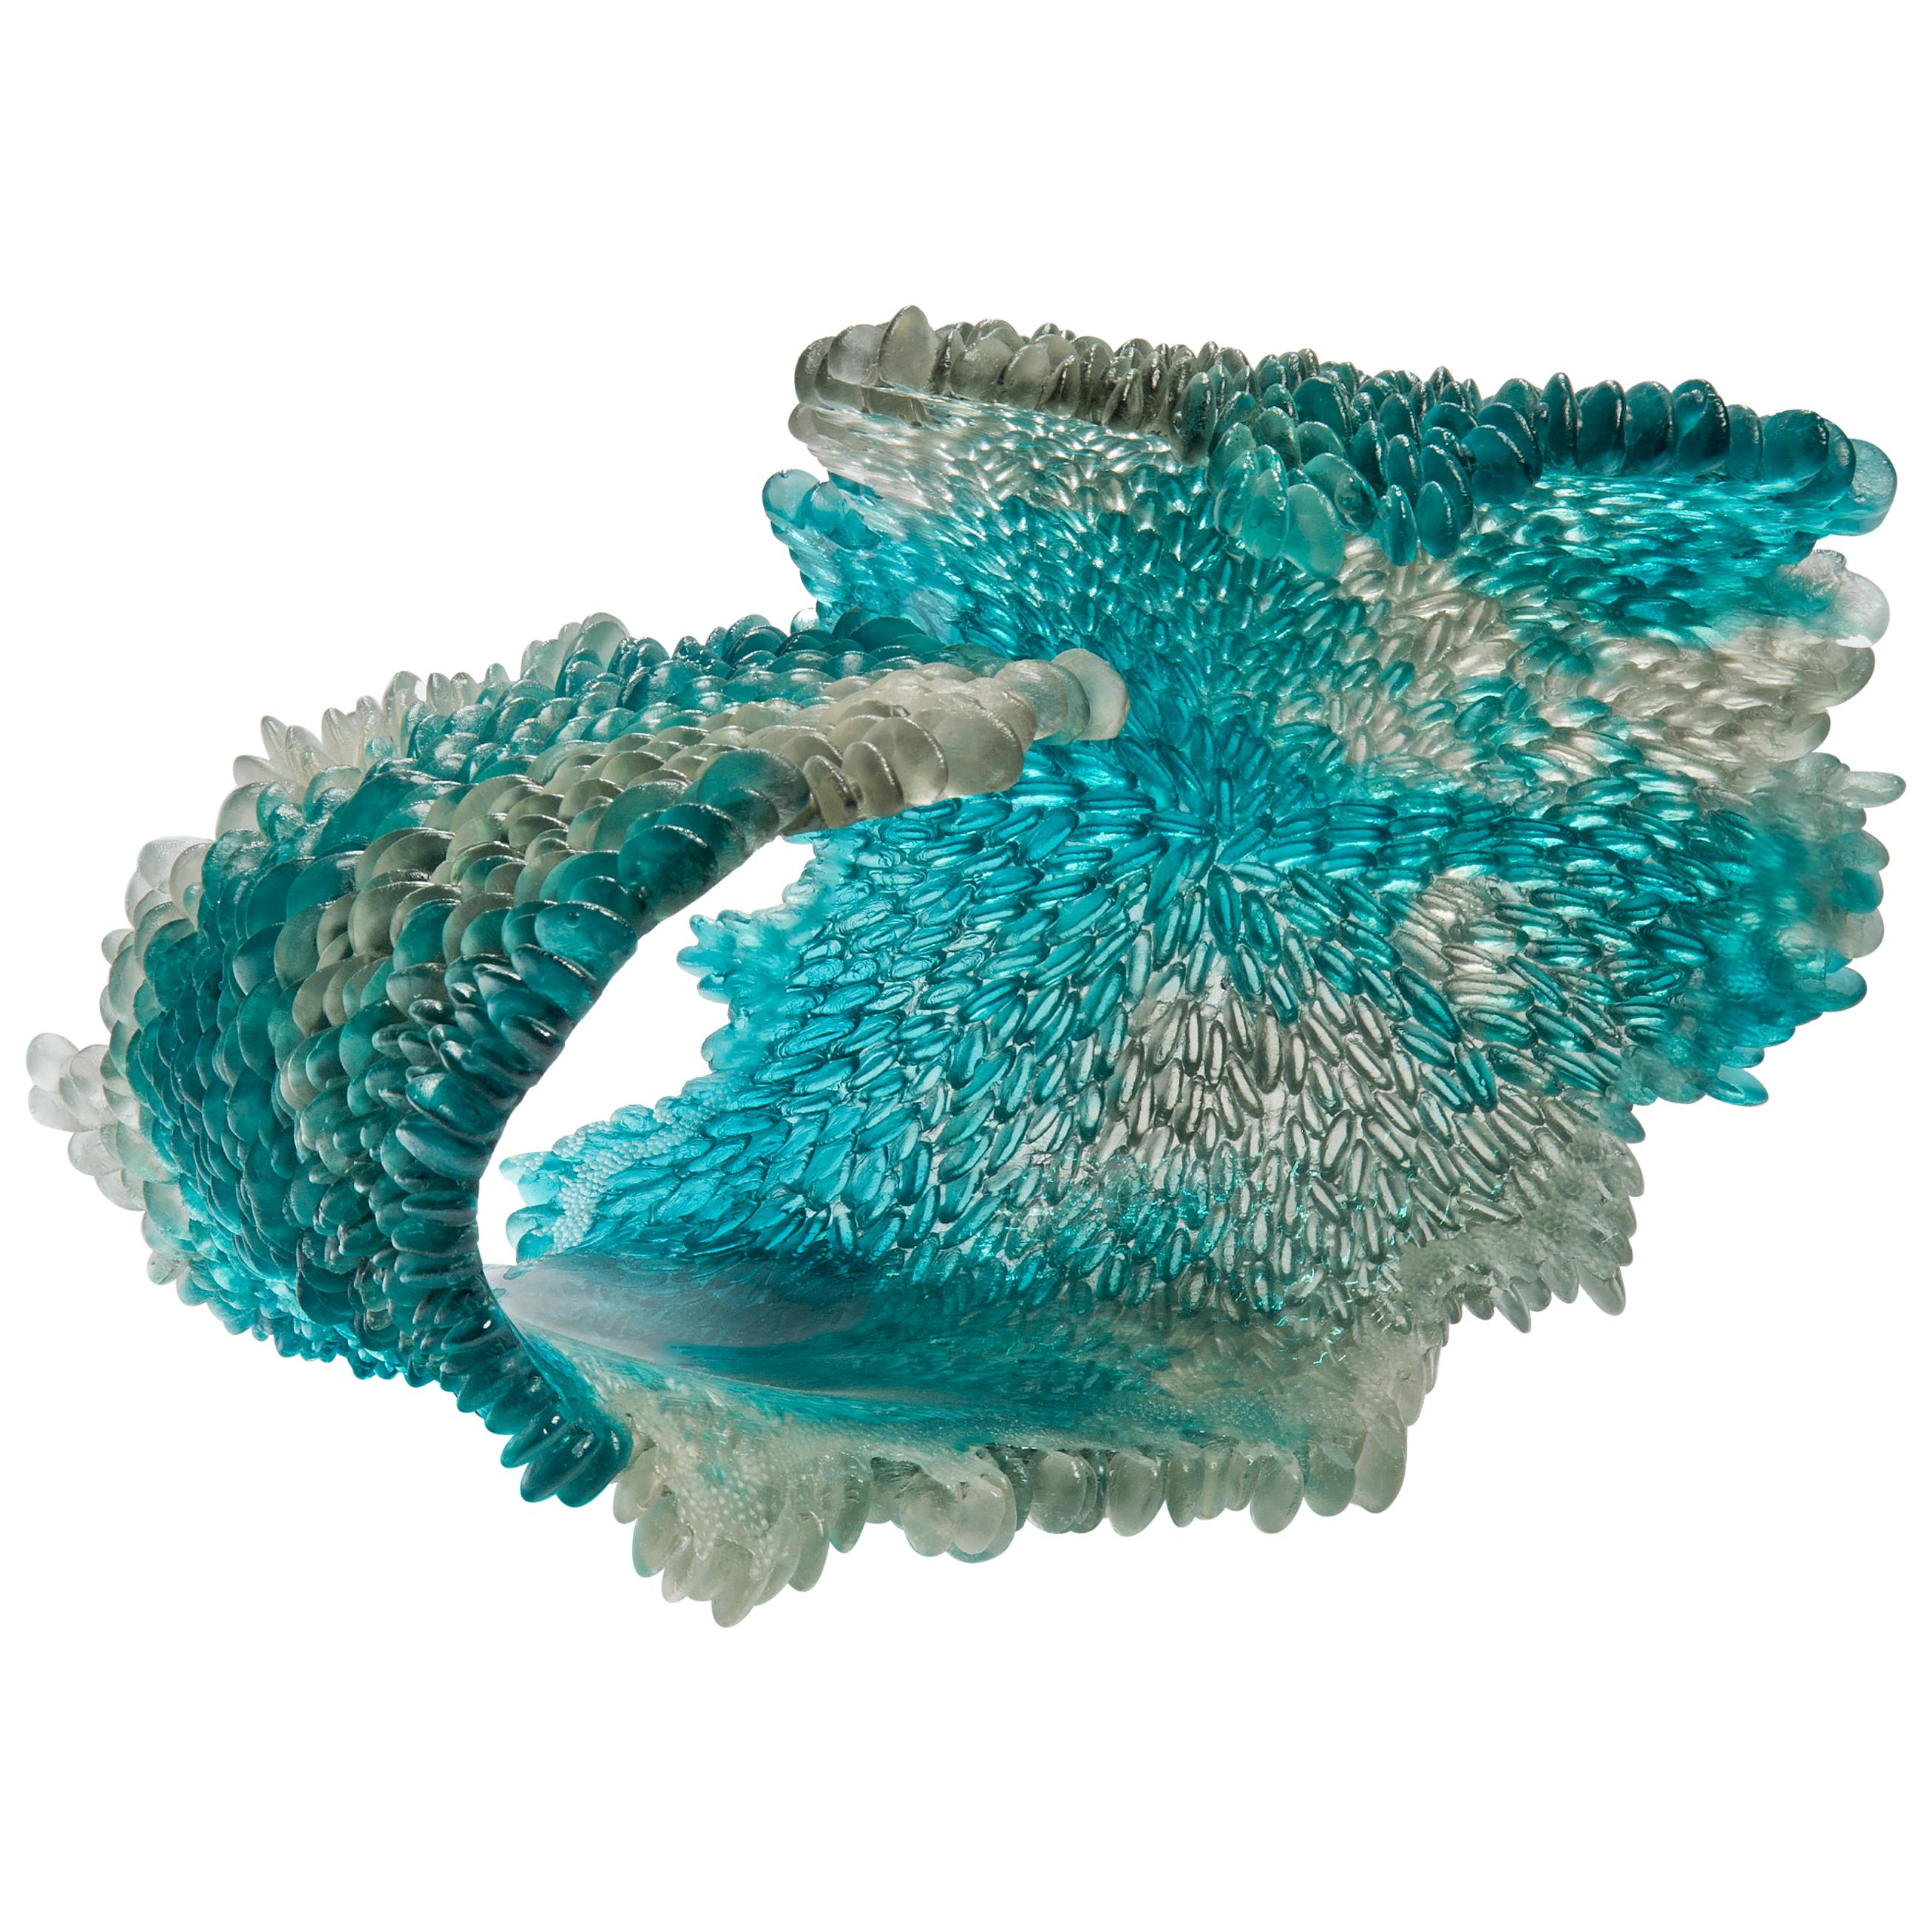 Alliform II, a Unique Glass Sculpture in Clear and Teal by Nina Casson McGarva